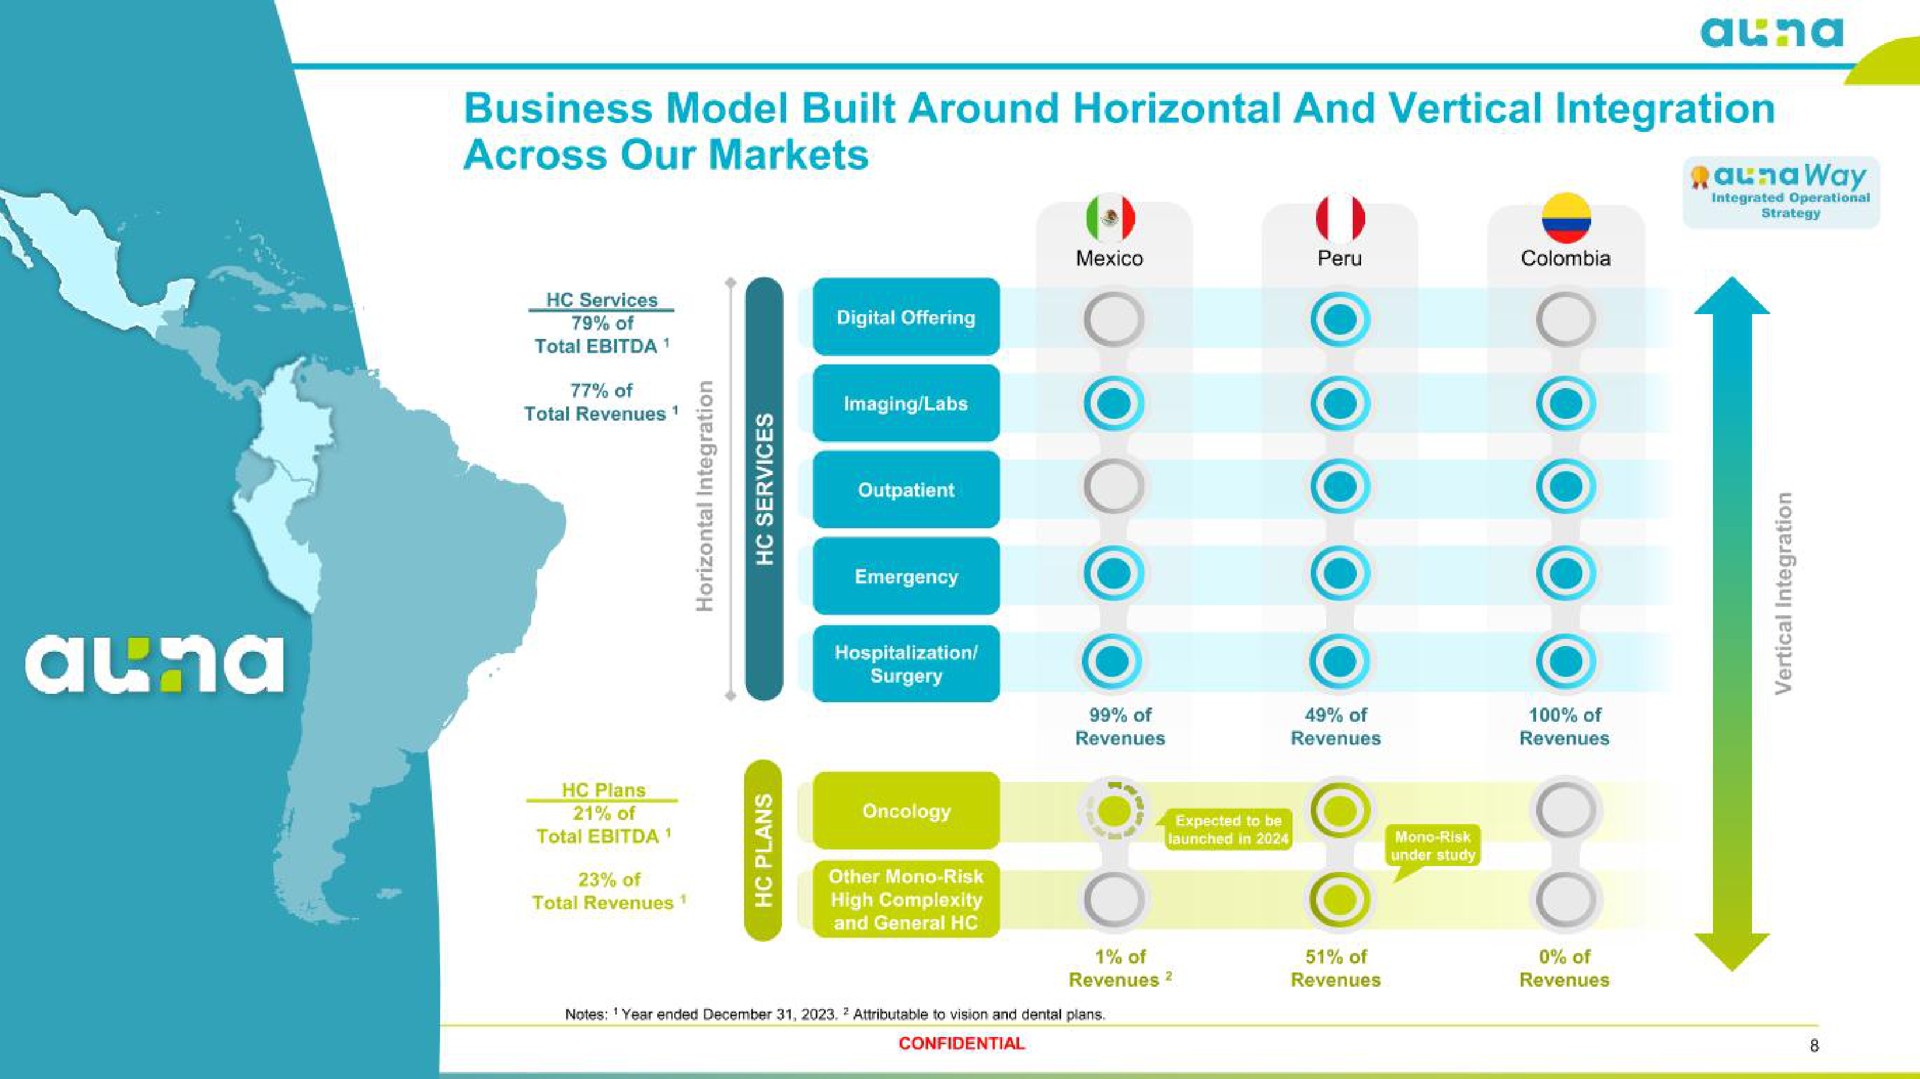 business model built around horizontal and vertical integration across our markets | Auna SA